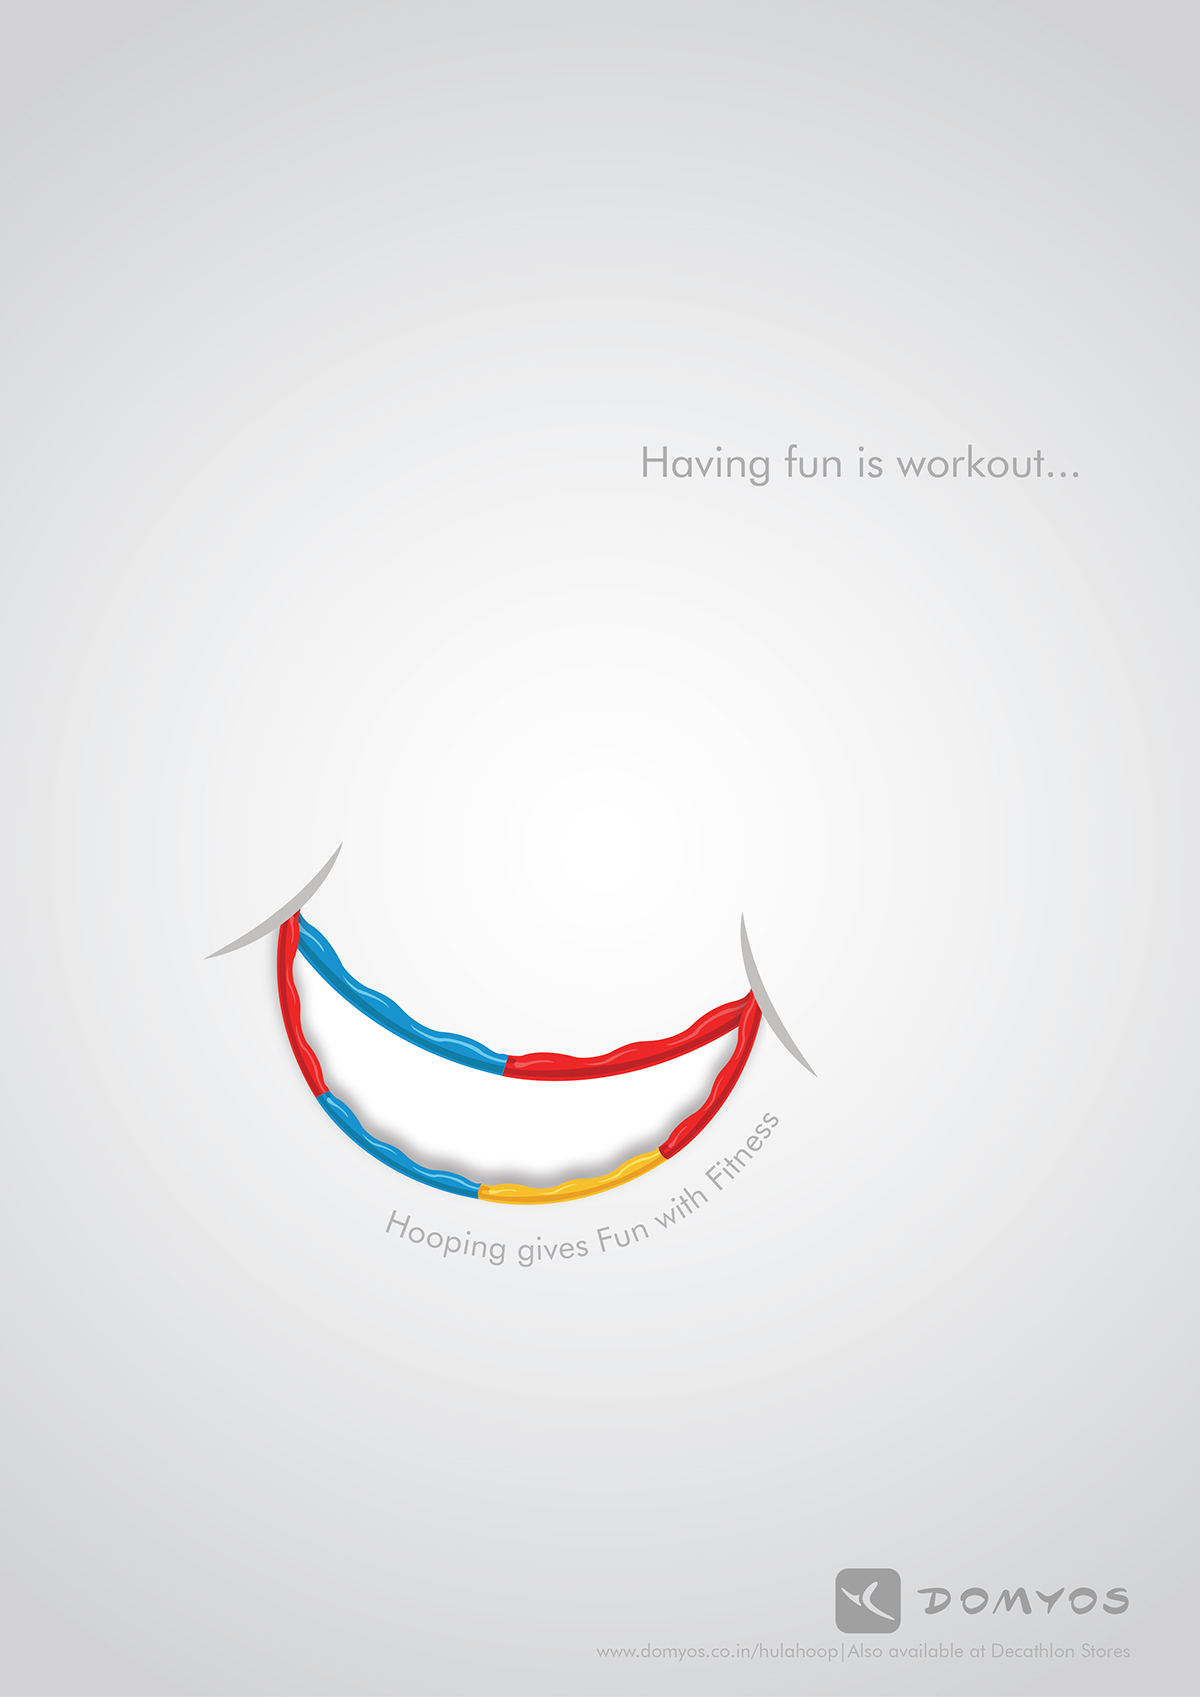 hula hoop mini campaign campaign minimalistic Layout Minimal graphic domyos fitness equipment workout weight lose meditation happiness rhythm exrecise